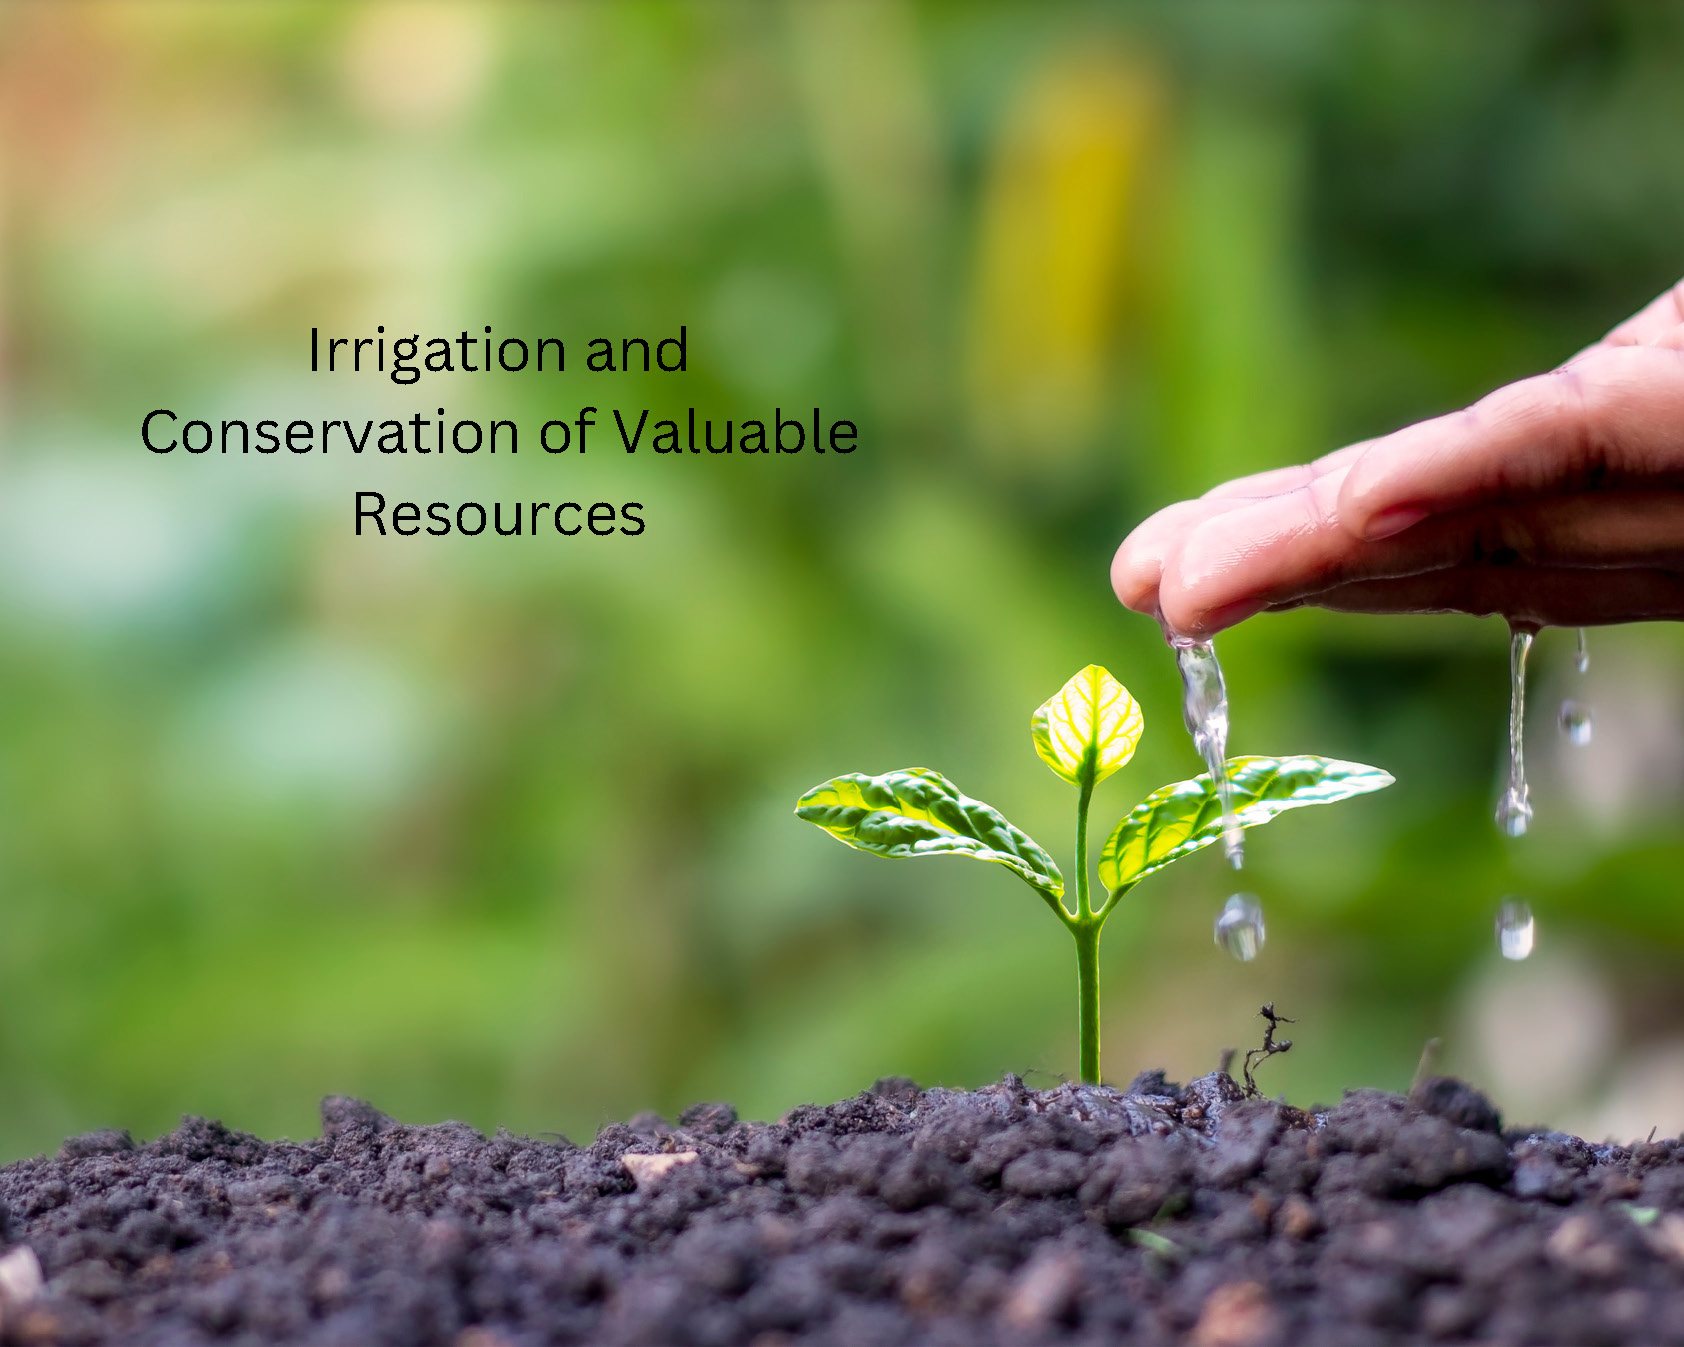 Irrigation and Conservation of Valuable Resources[67]